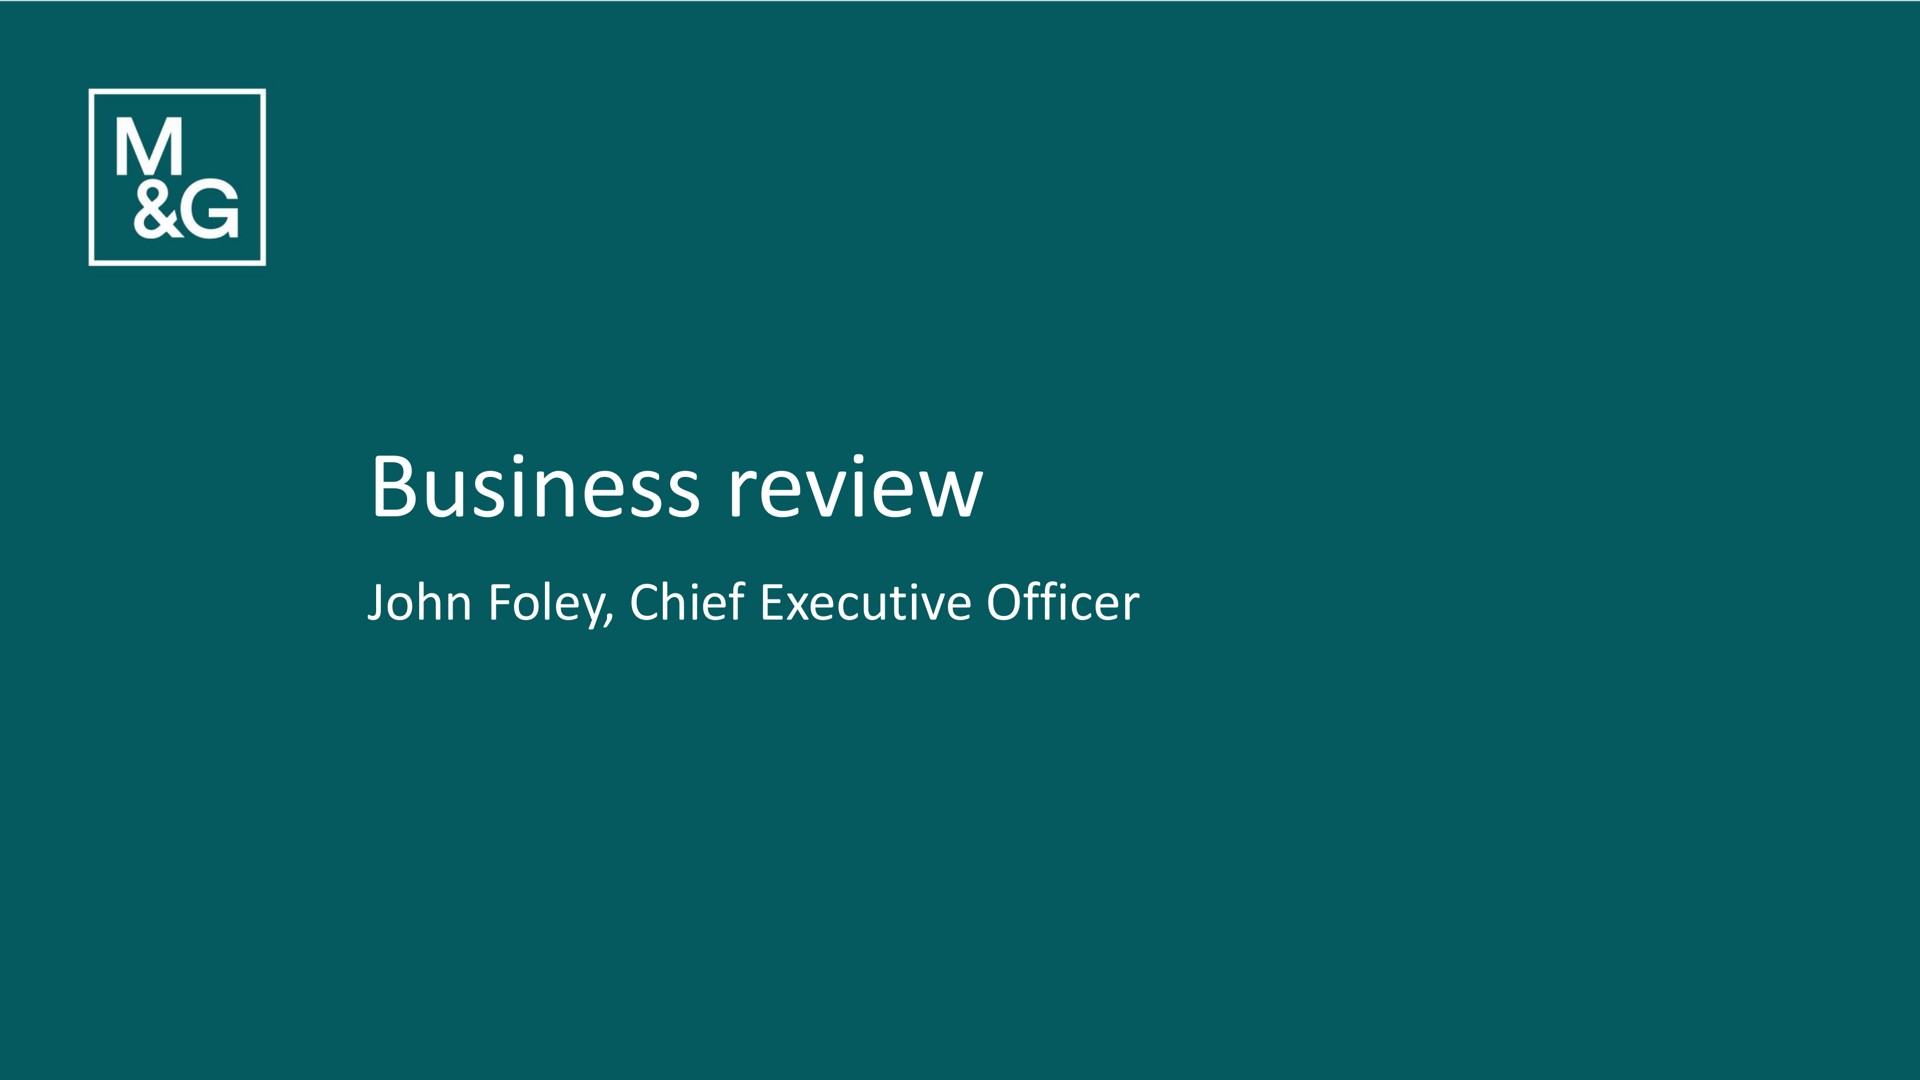 business review chief executive officer | M&G